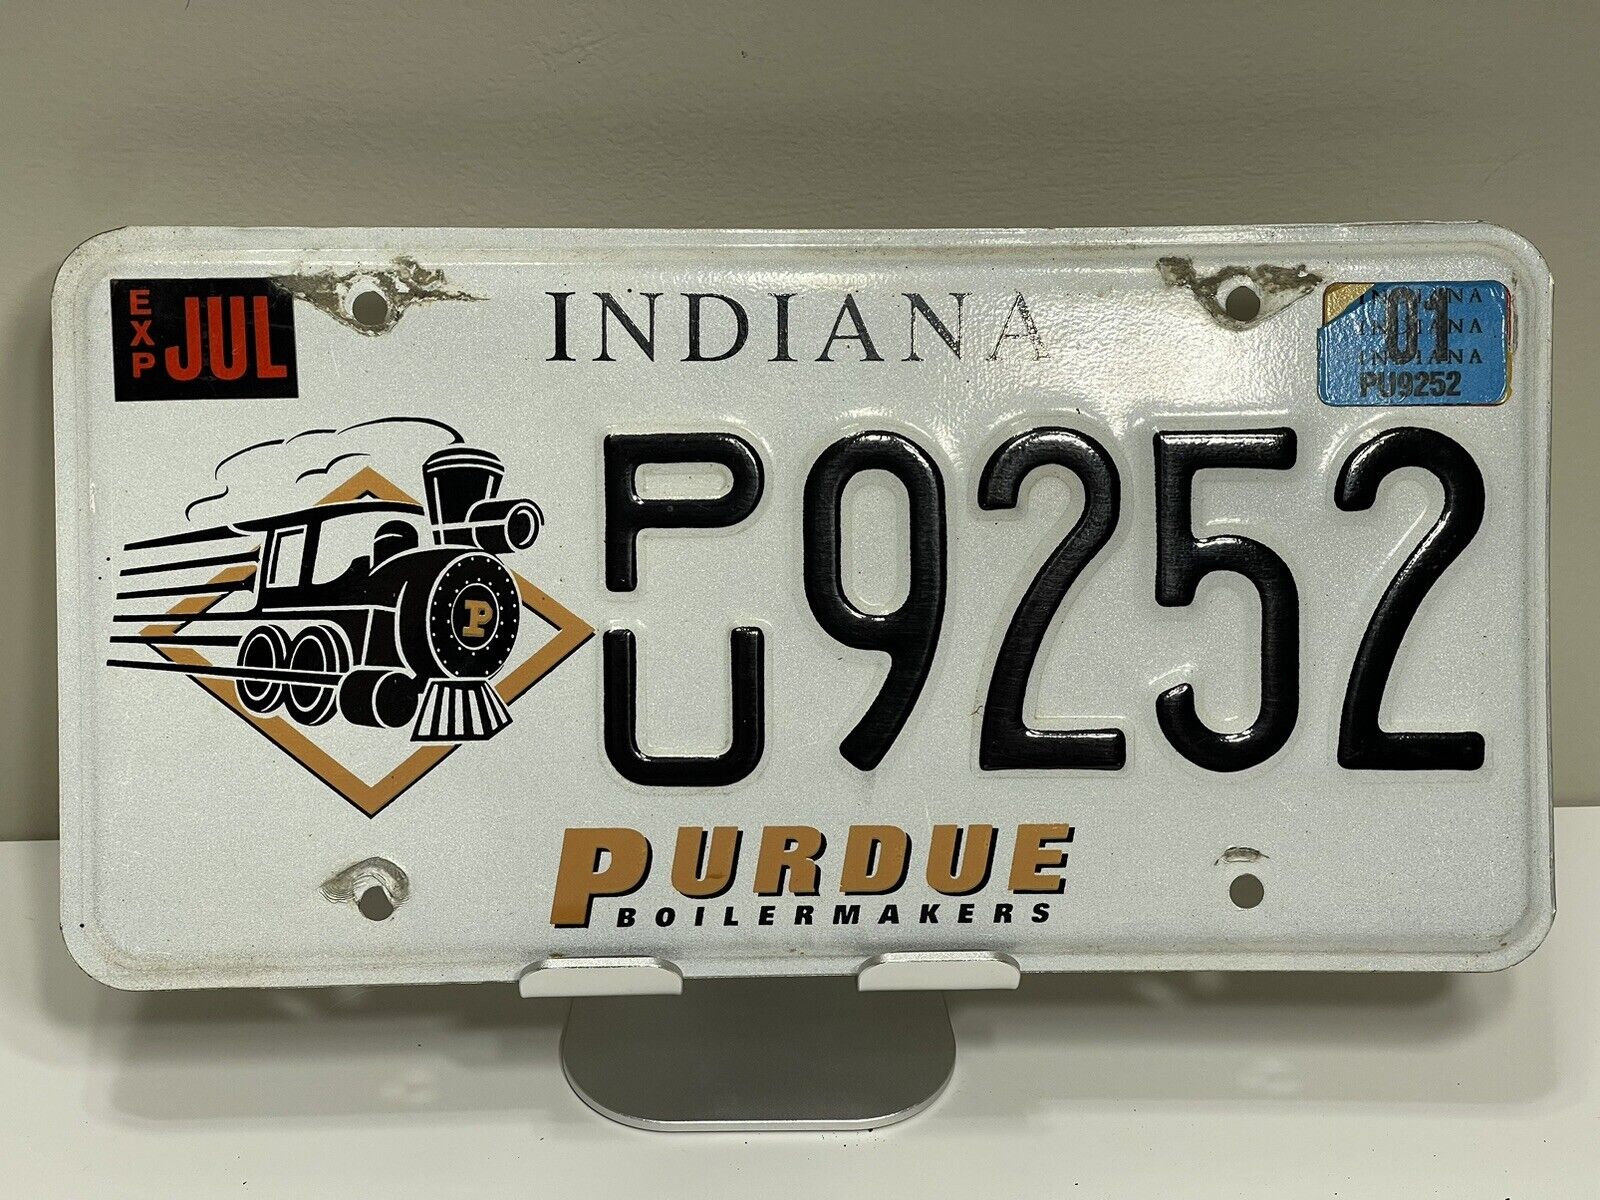 2001 Indiana Purdue University License Plate - # PU 9252 - Boilermakers -EXPIRED